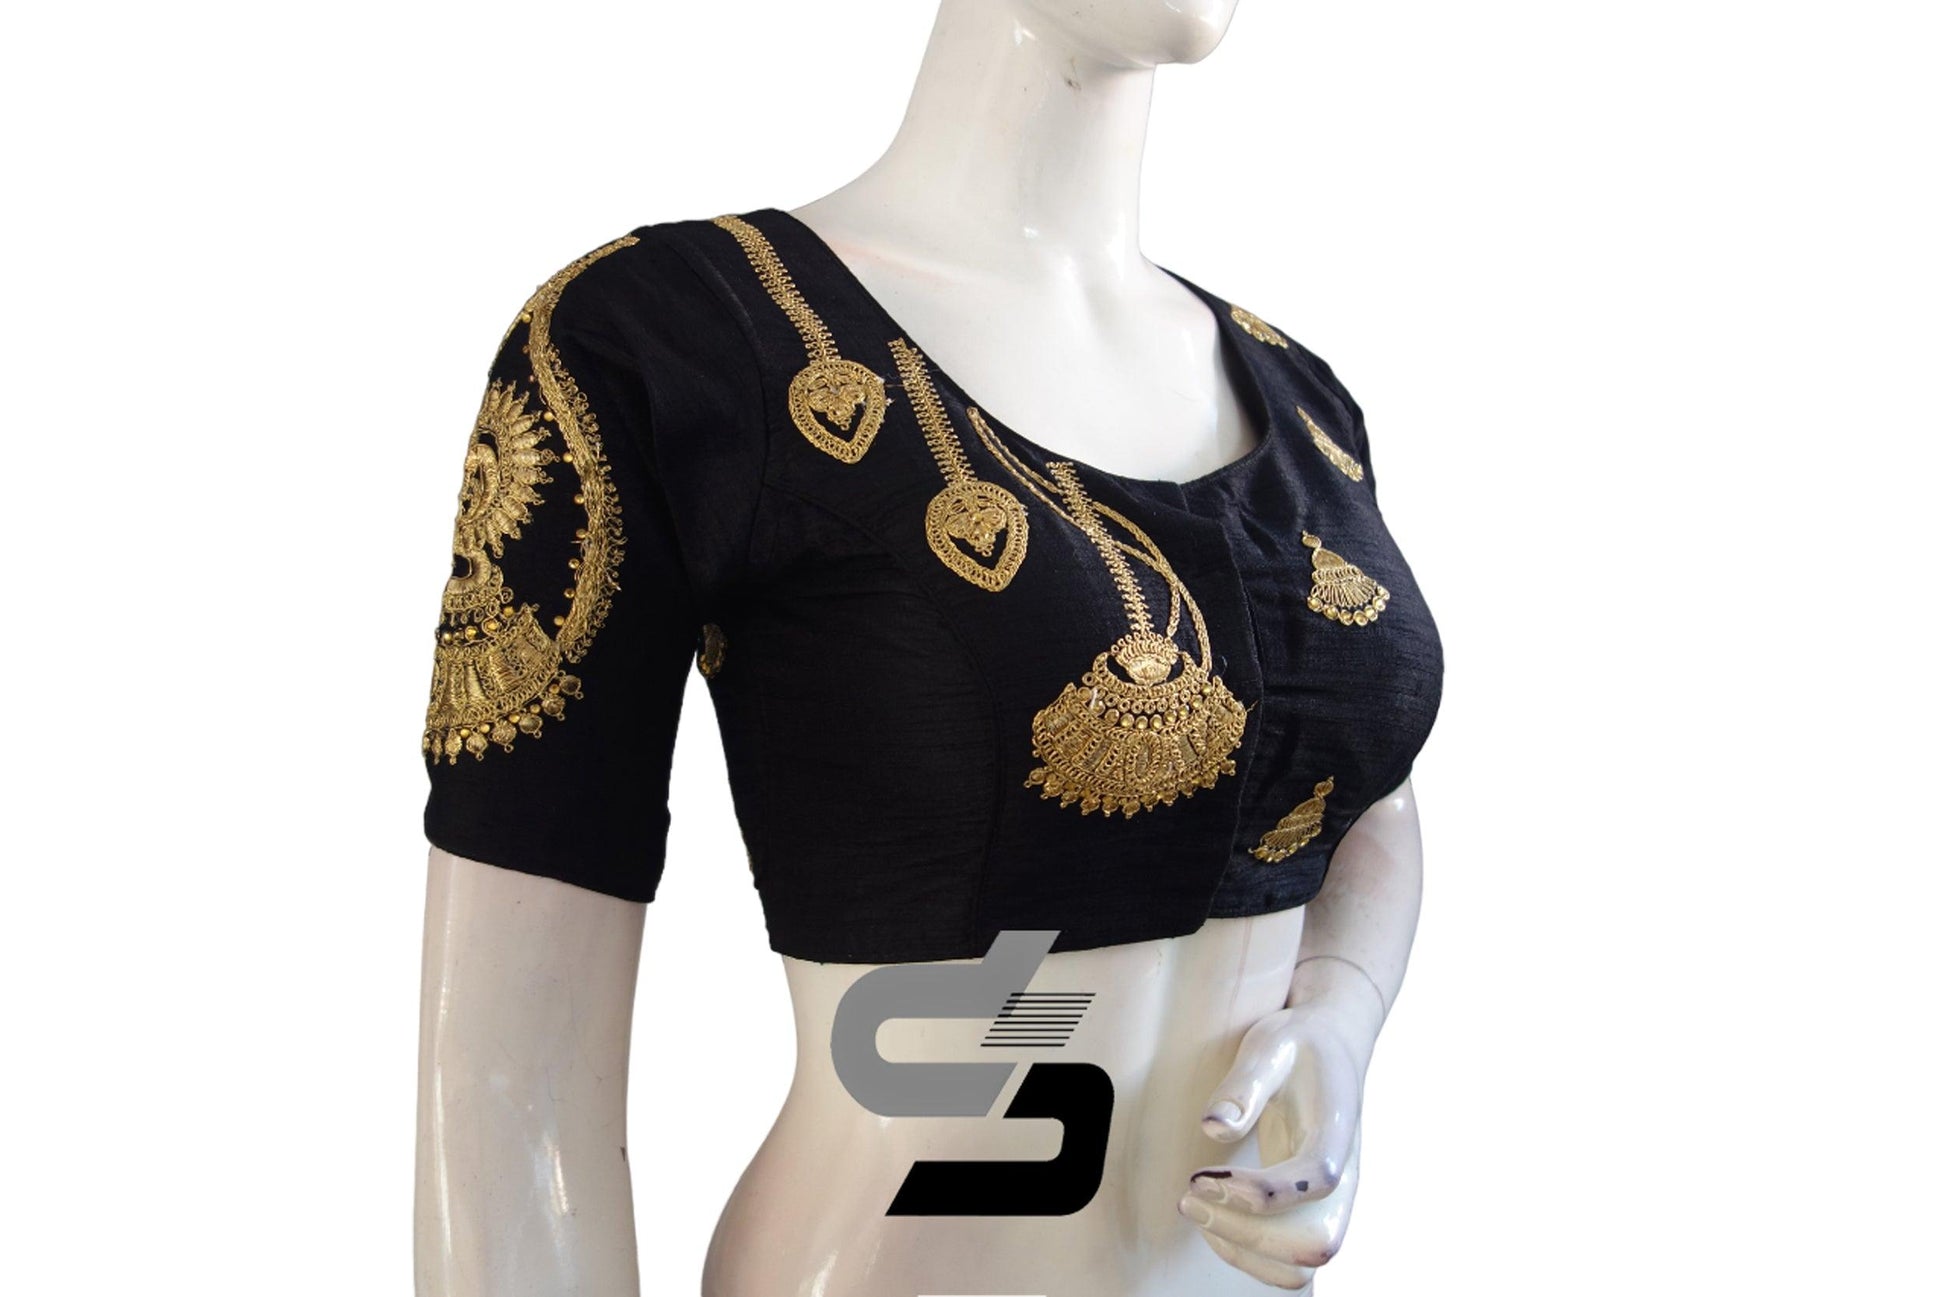 Black Color High Neck Designer Embroidery Readymade Saree Blouses,Revitalize your outfit by incorporating a vibrant splash of color. - D3blouses